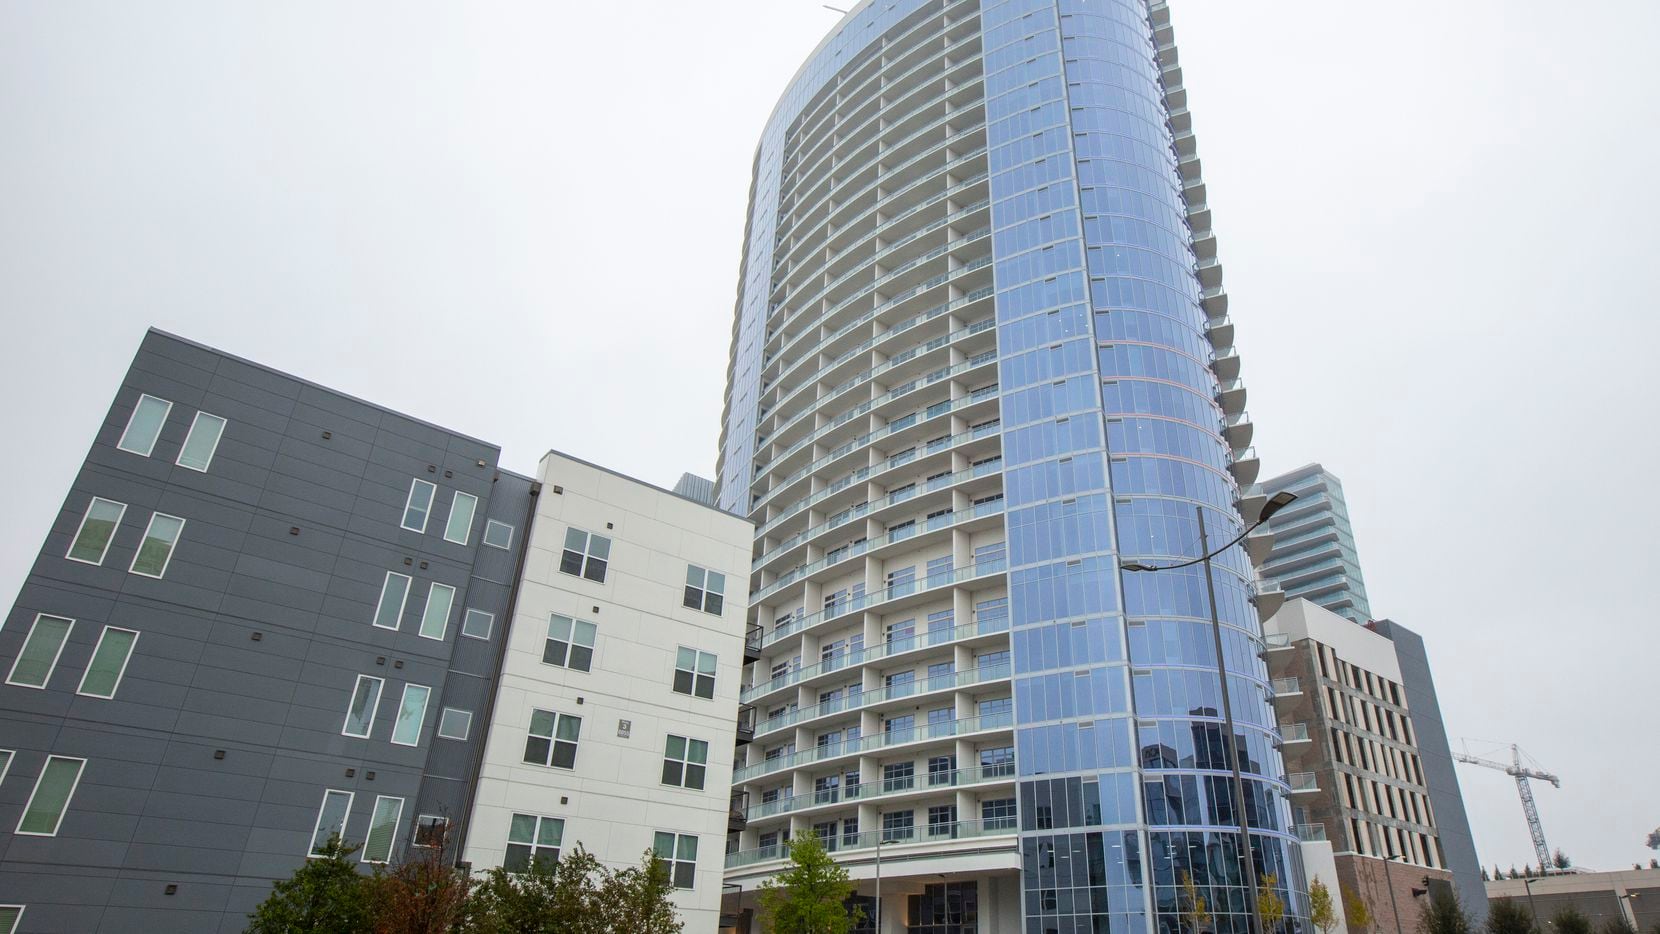 The 29-story LVL29 apartment high-rise in Plano was the first high-rise residential building...